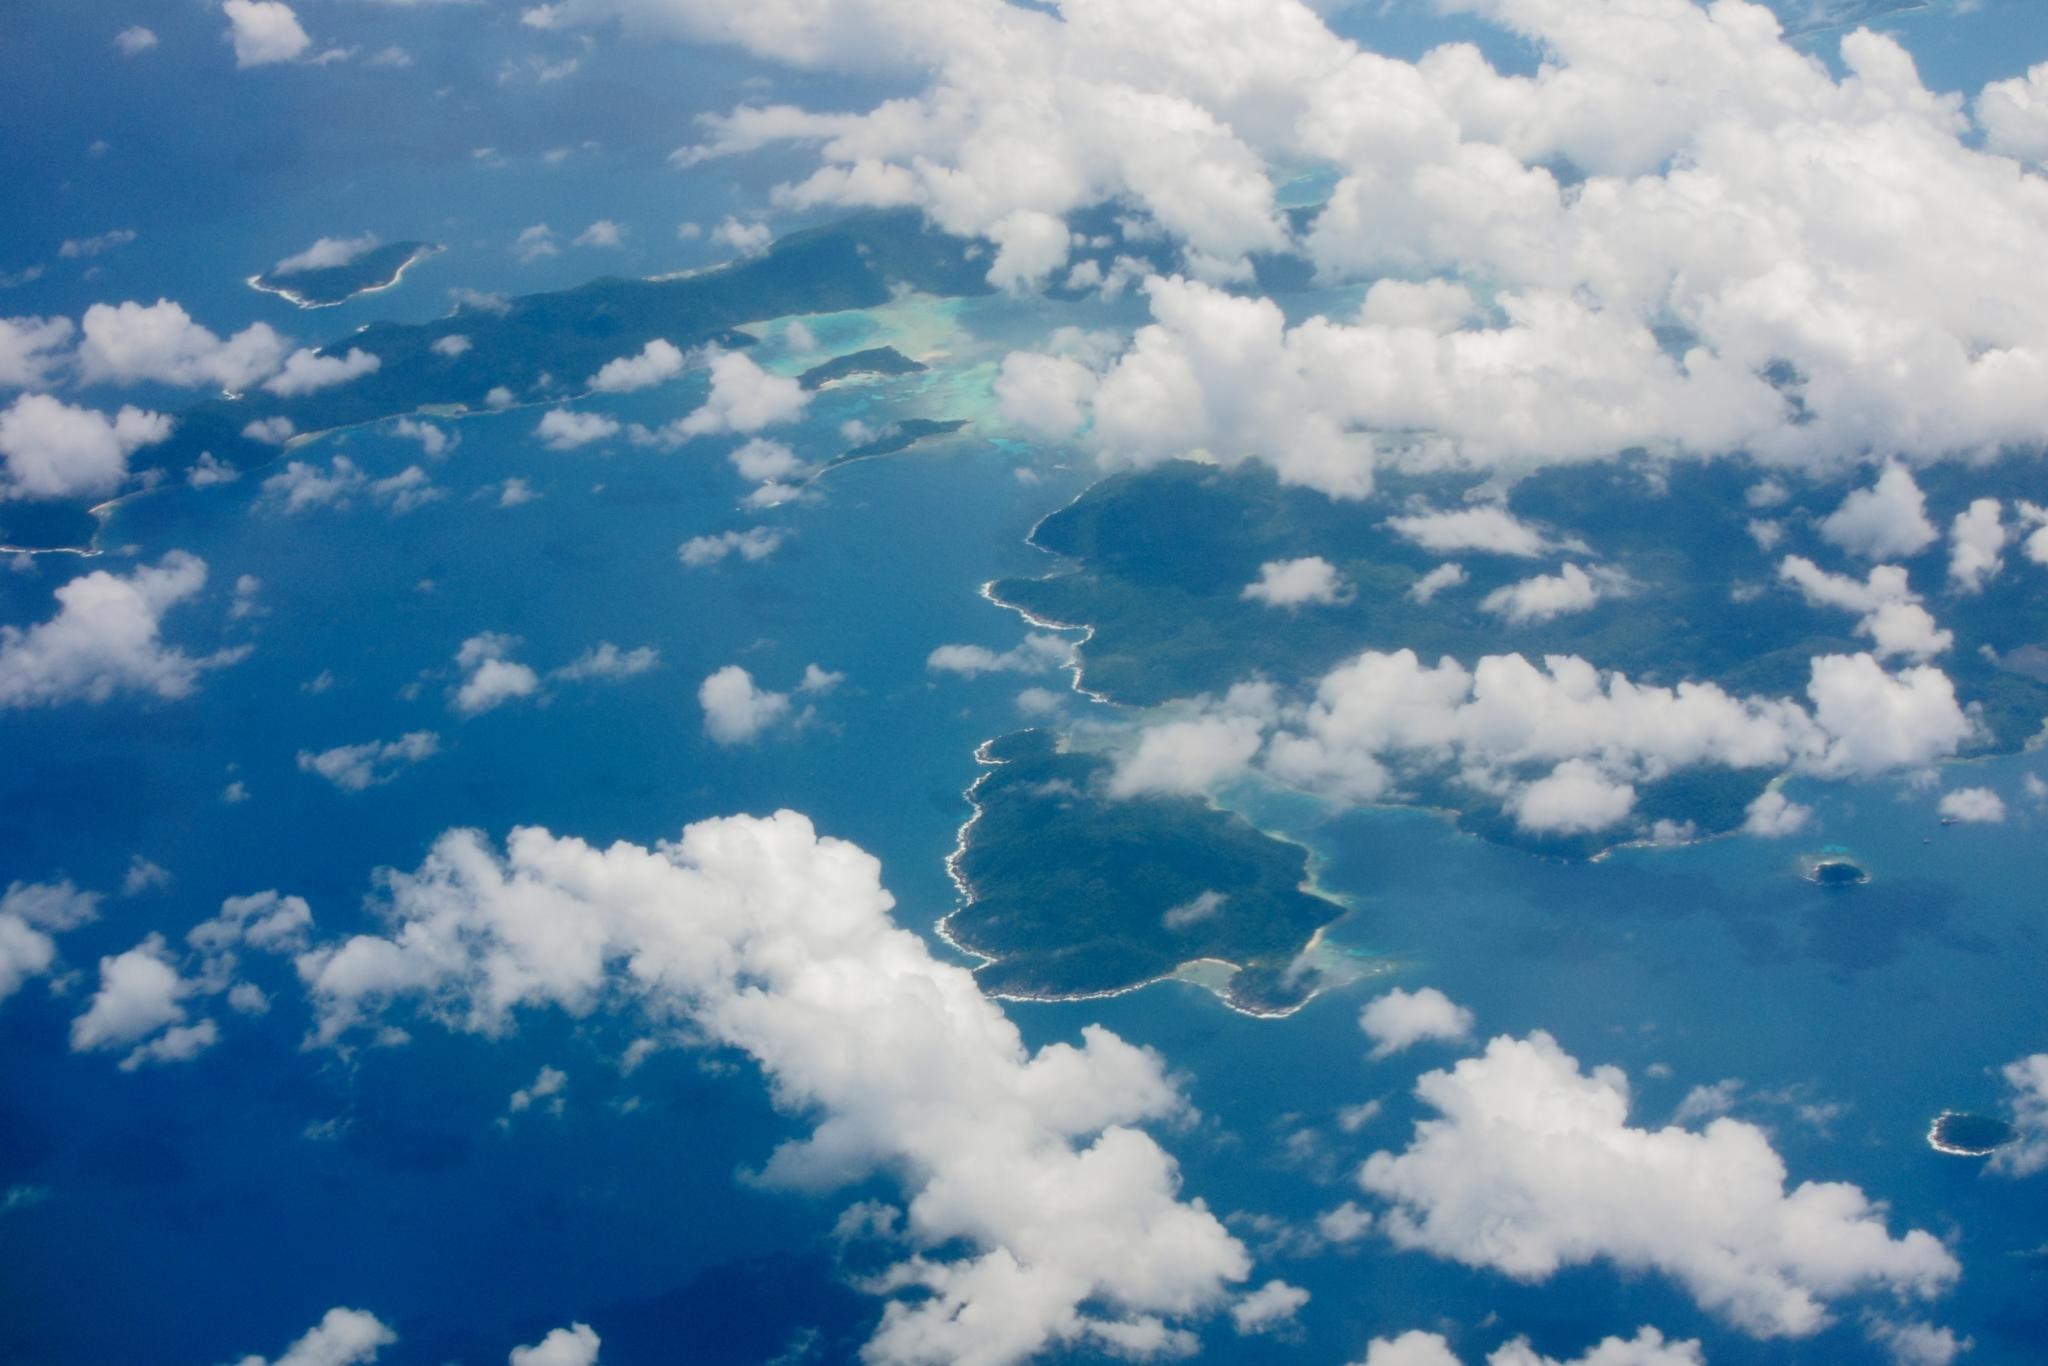 An aerial view onto clouds over the South China Sea